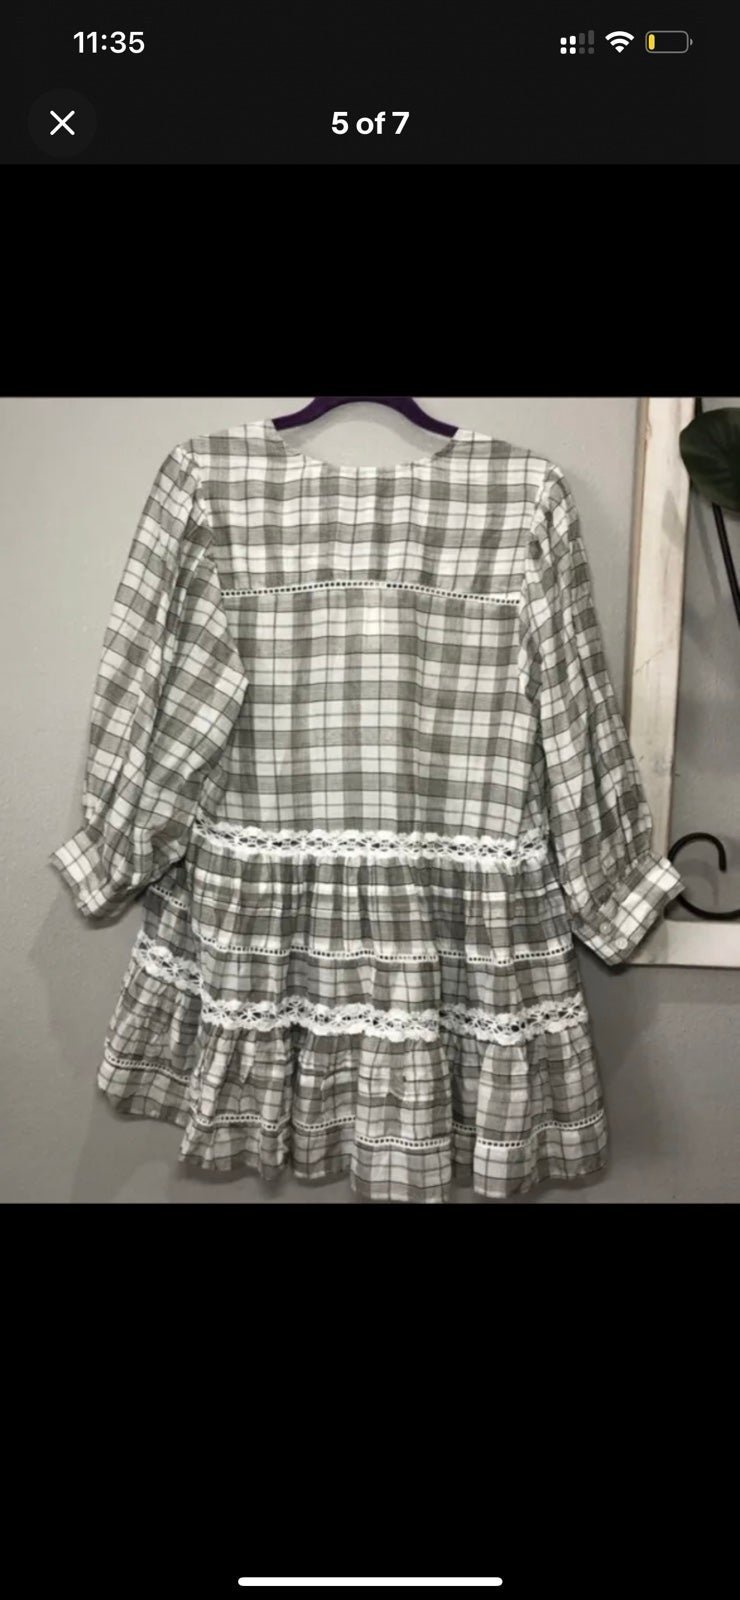 Simple Free People Time Out Plaid Lace Babydoll Tunic Tiered Ivory Plaid Cotton HYkaNsEQr US Outlet